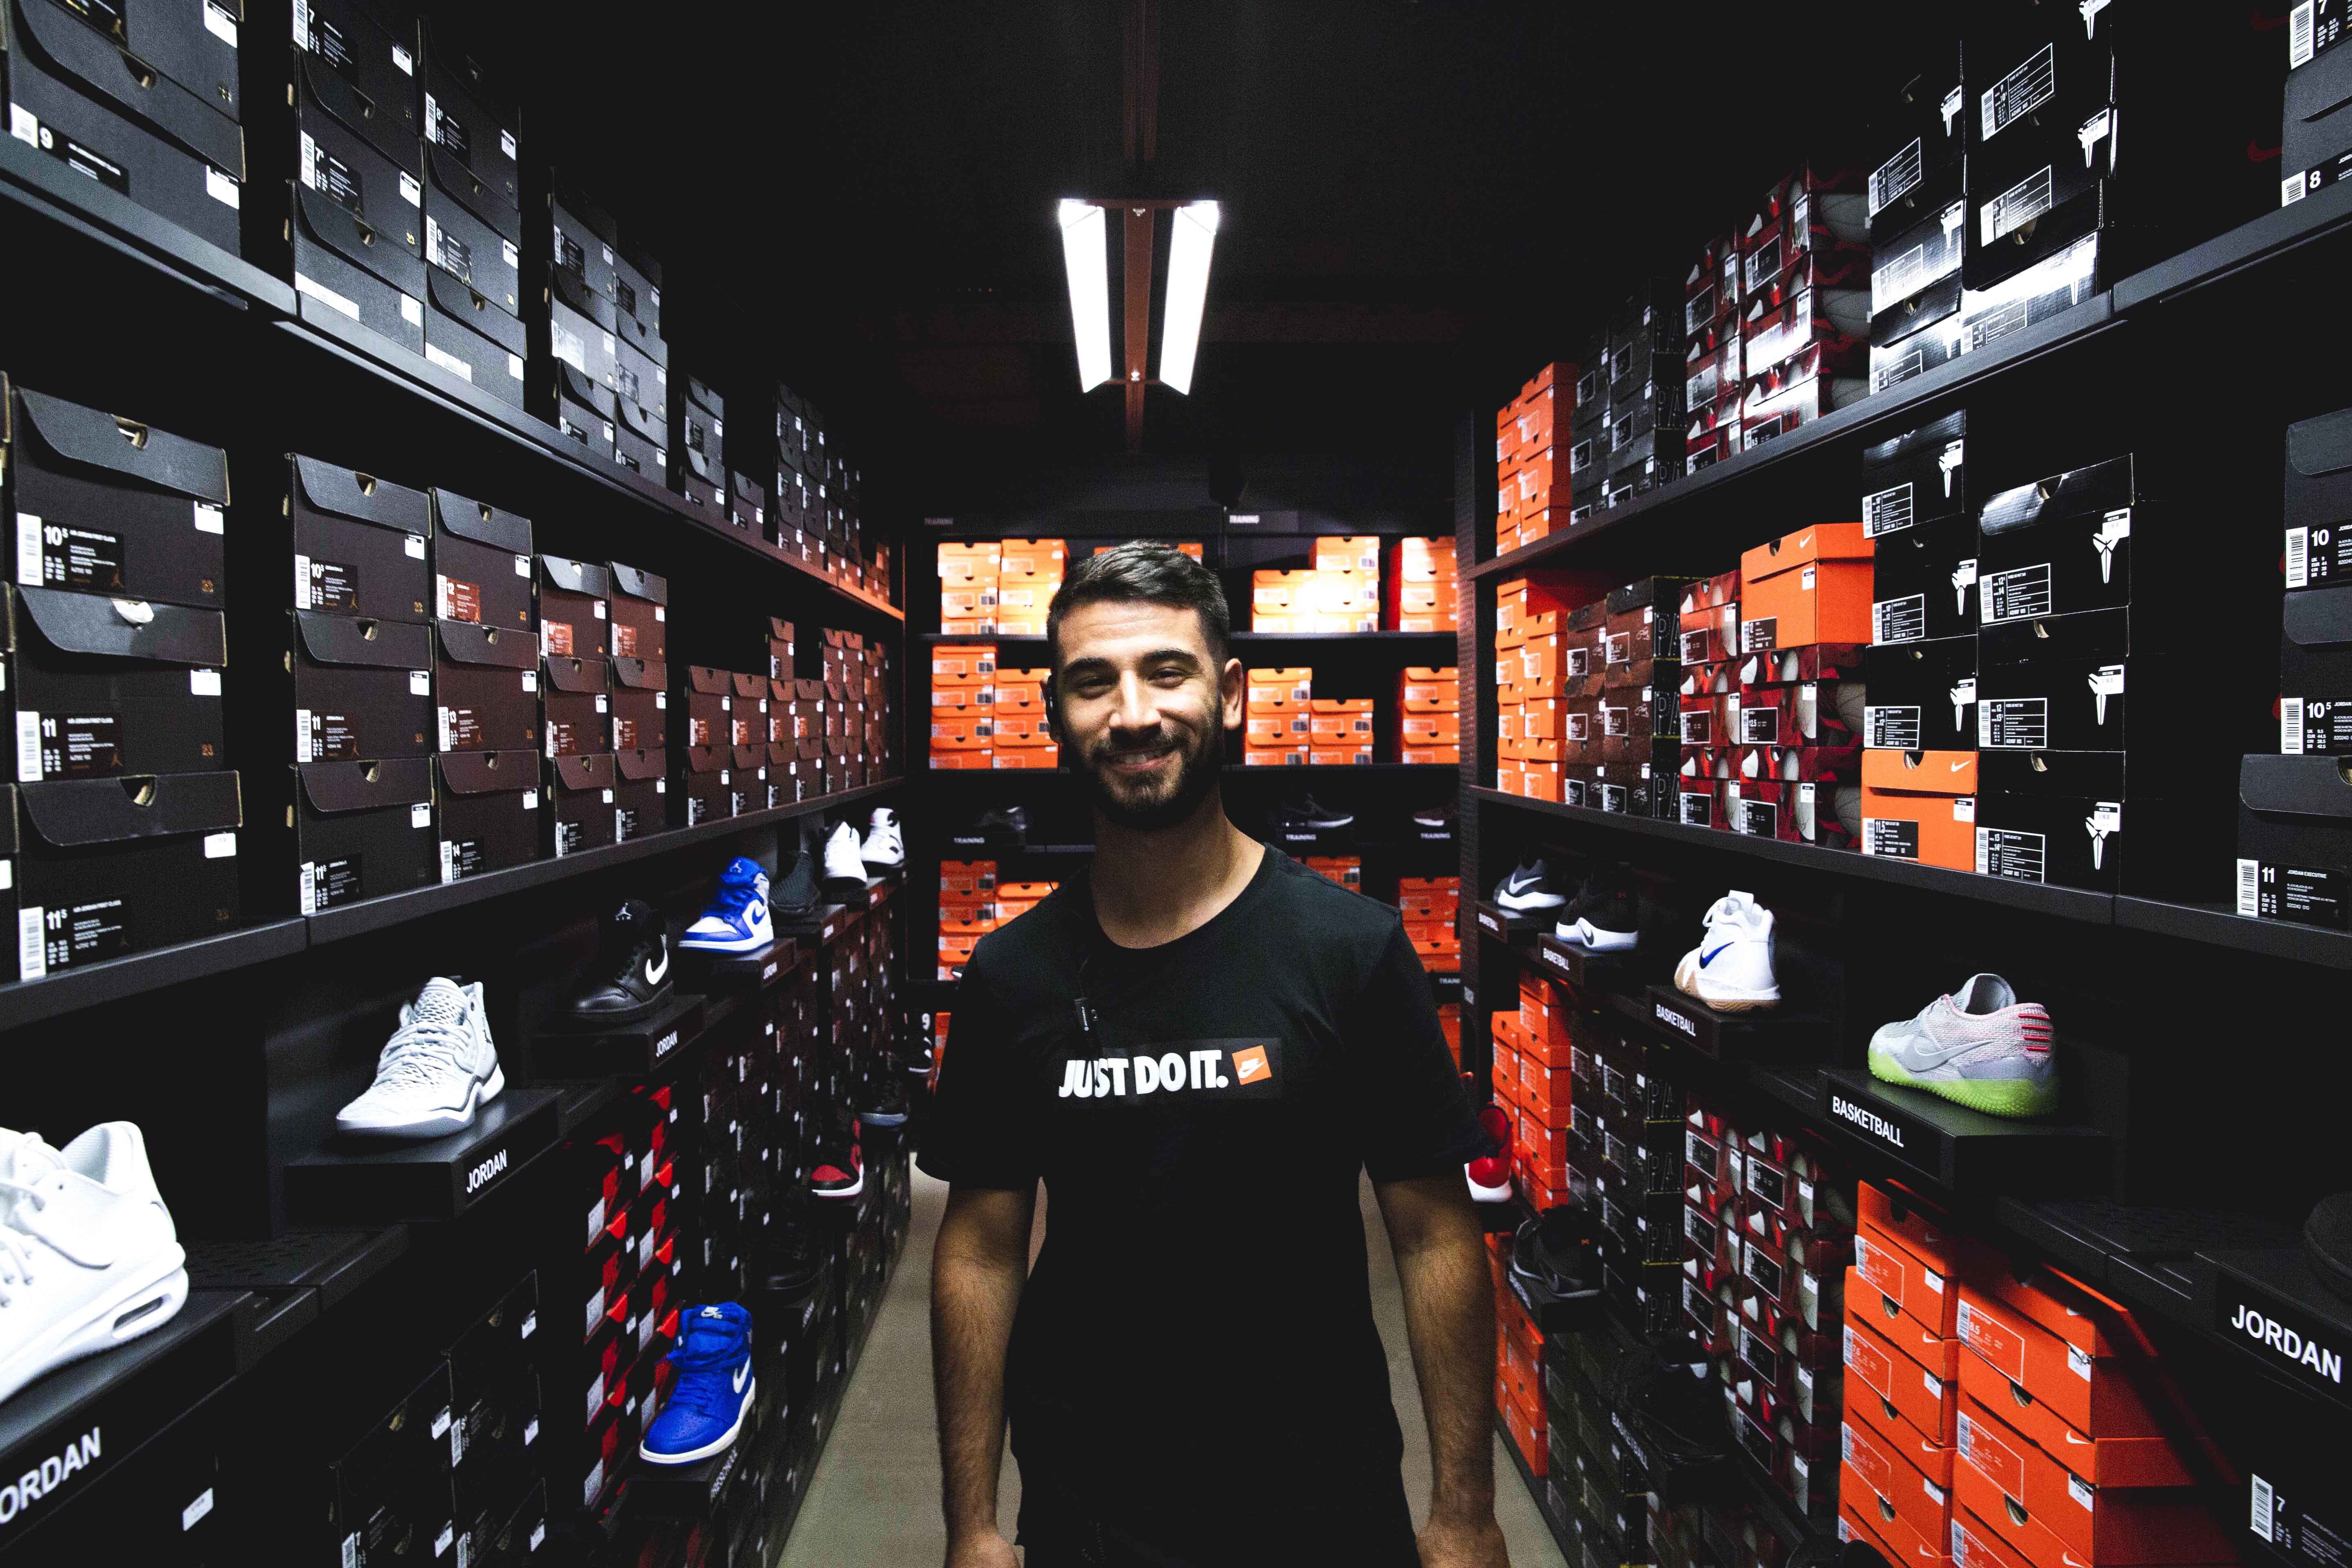 nike outlet store hiring